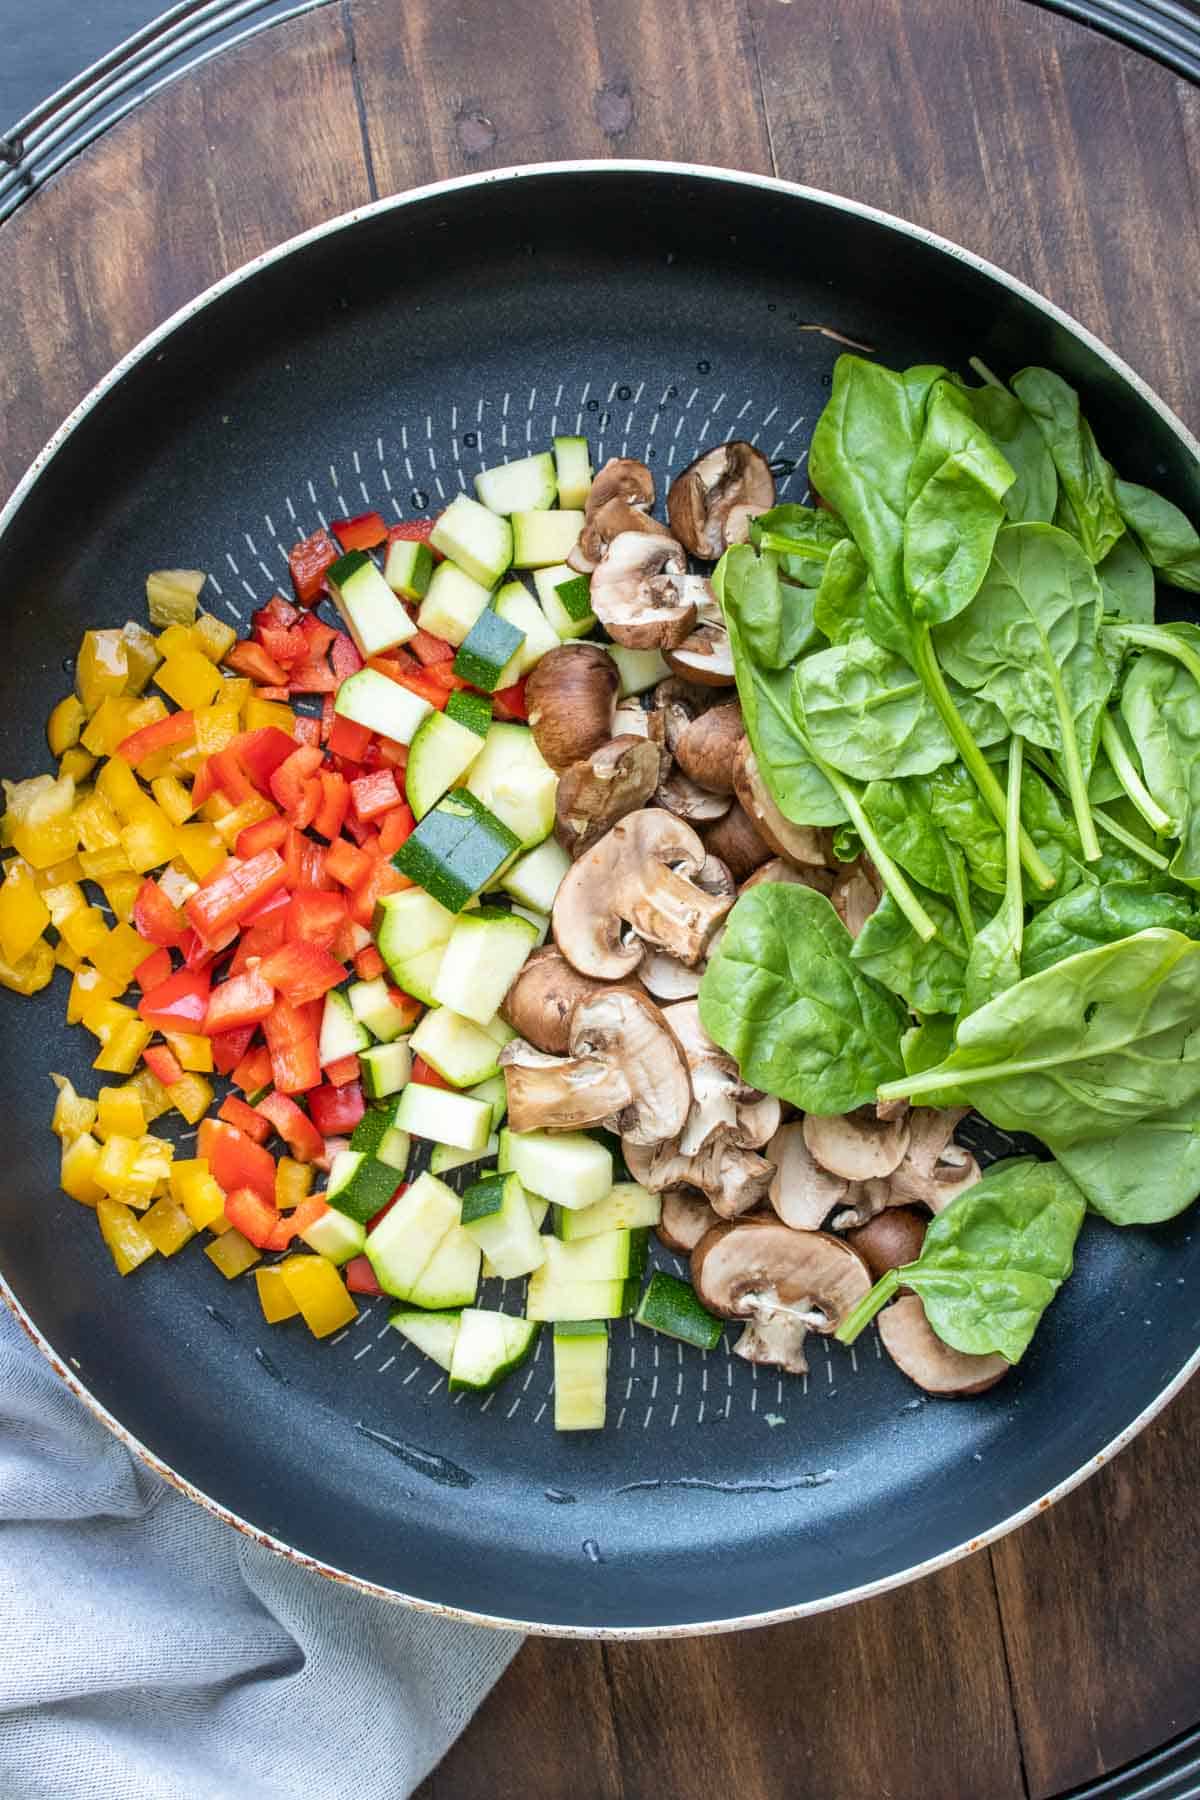 Chopped mushrooms, peppers, zucchini and spinach lined up in a pan